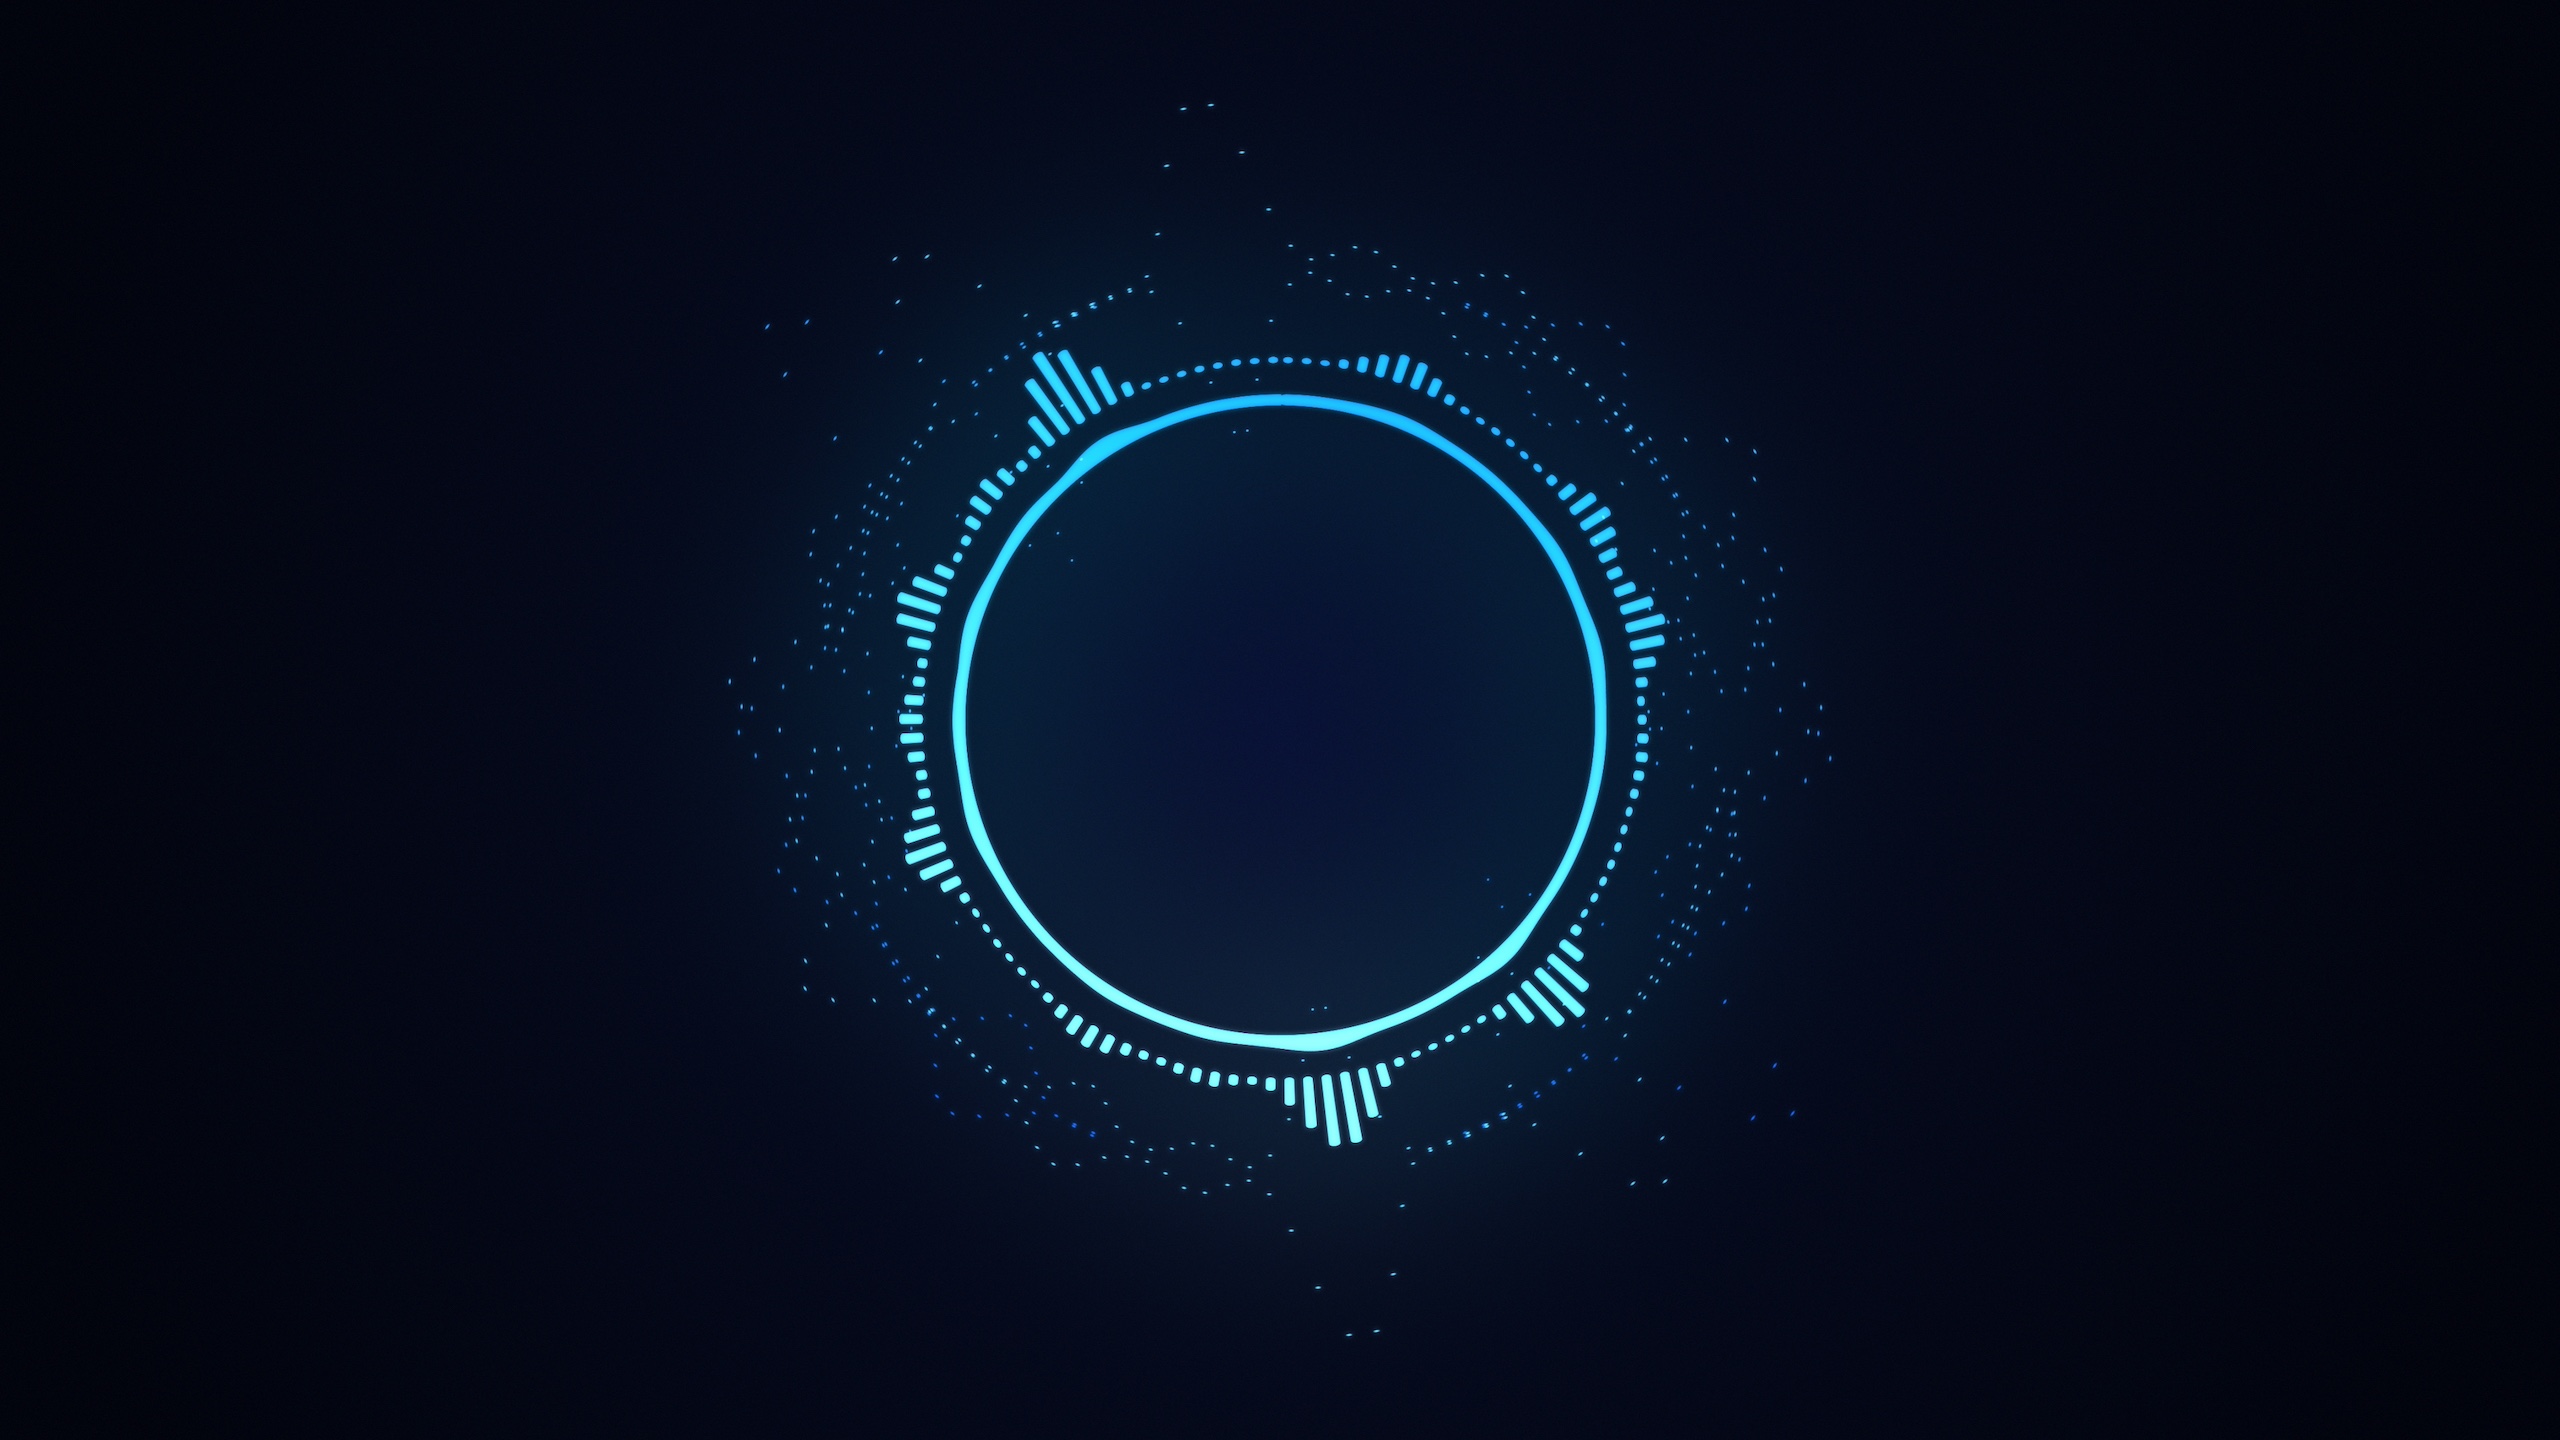 Bright glowing radial or circular equalizer illustration. Visualization of voice, music playback. Audio waveform with flowing dotts. Technological background in blue neon colors